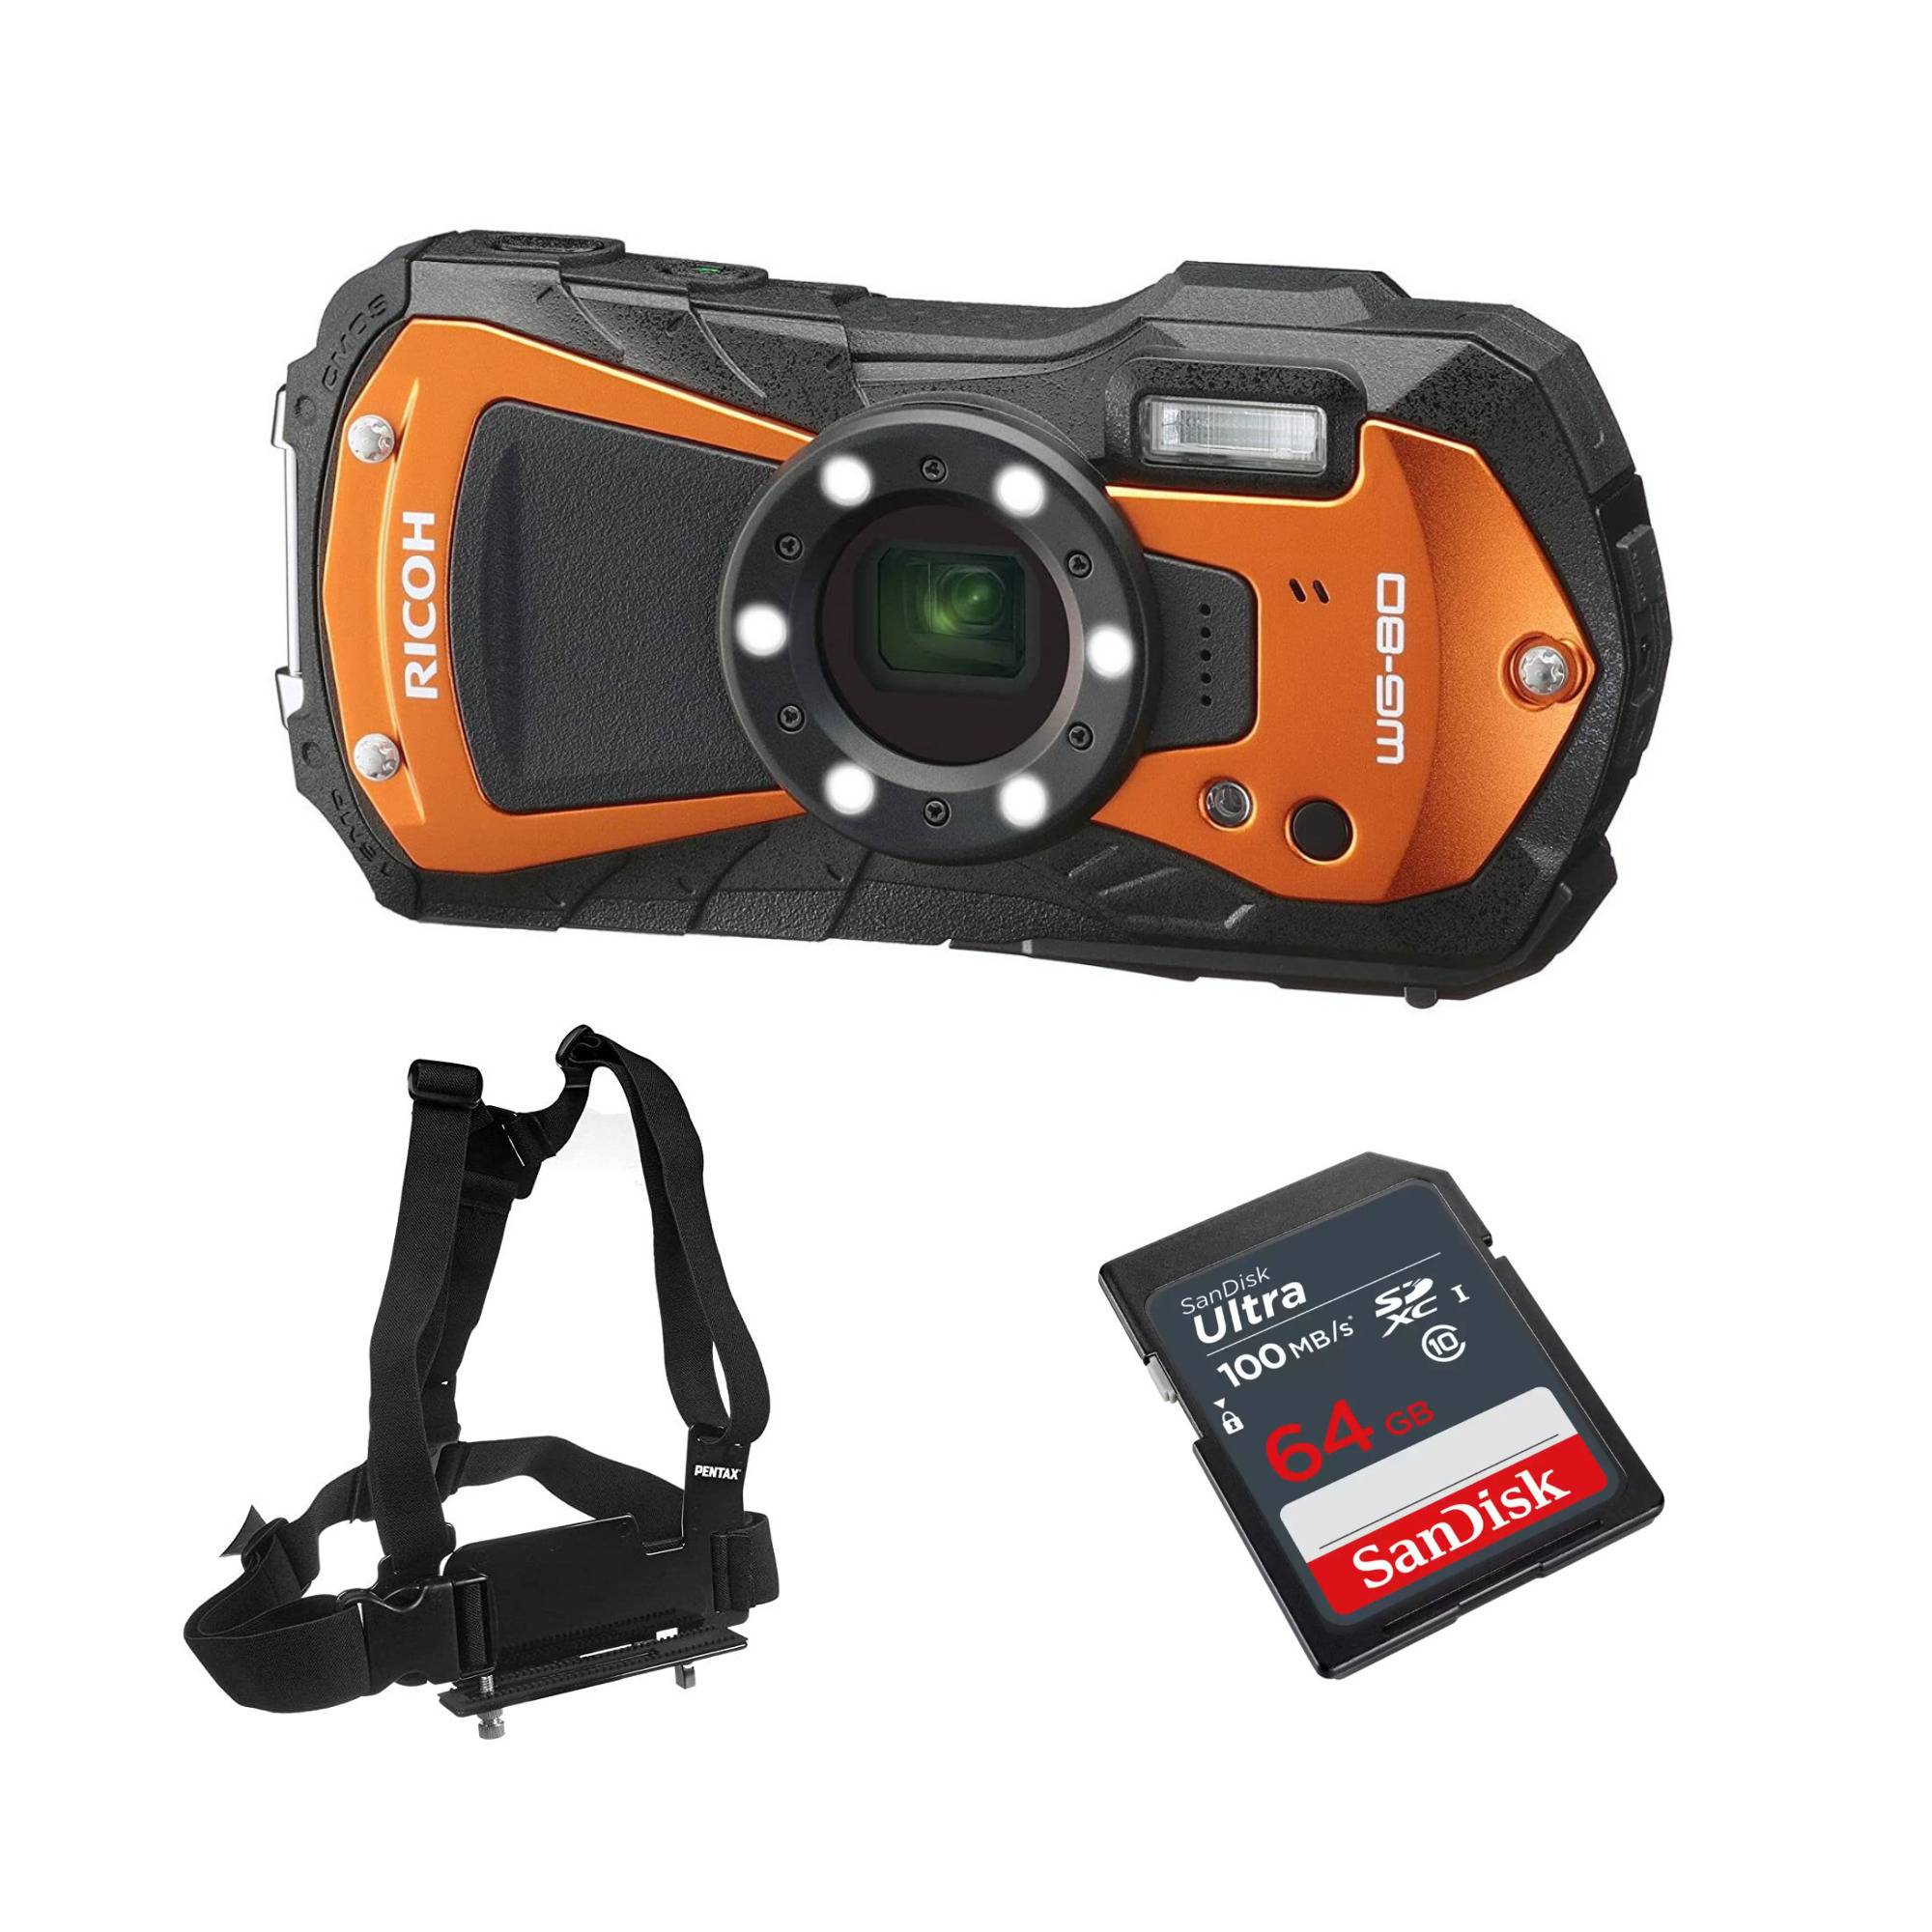 Ricoh WG-80 Digital Camera (Orange) with SanDisk 64 GB SD and Pentax Sports Mount Chest Harness